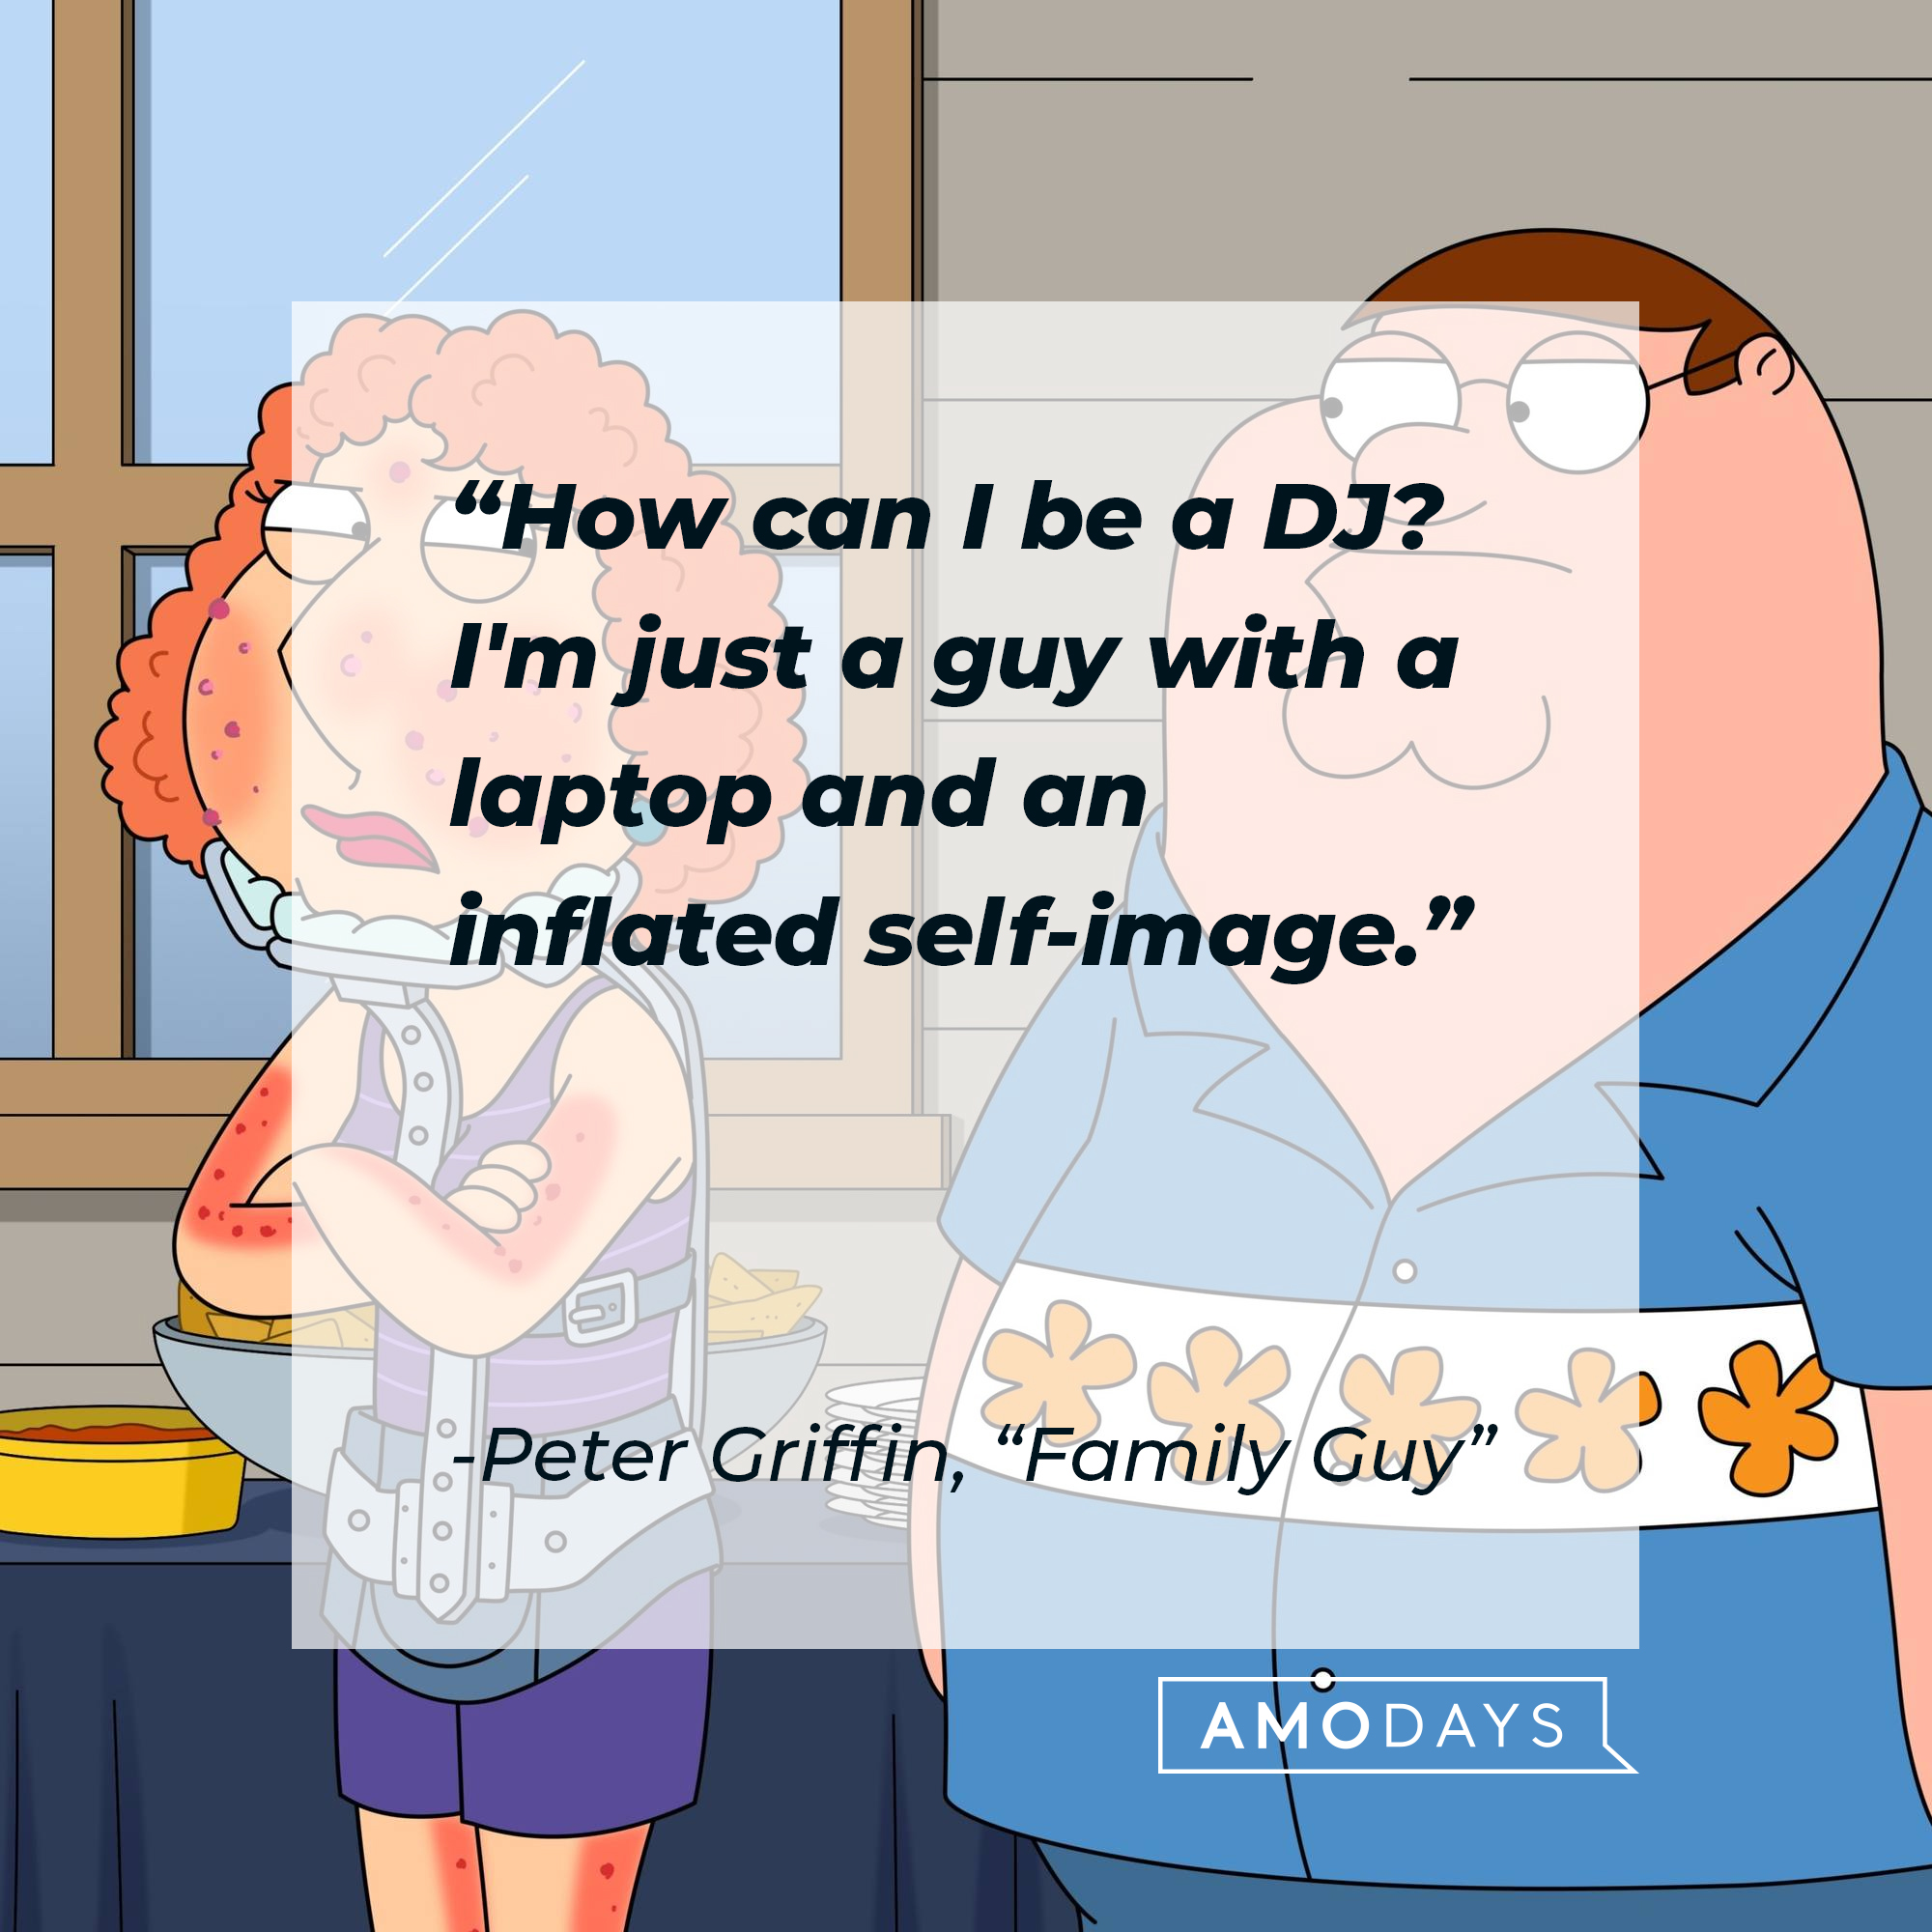 Peter Griffin's quote: "How can I be a DJ? I'm just a guy with a laptop and an inflated self-image." | Source: facebook.com/FamilyGuy